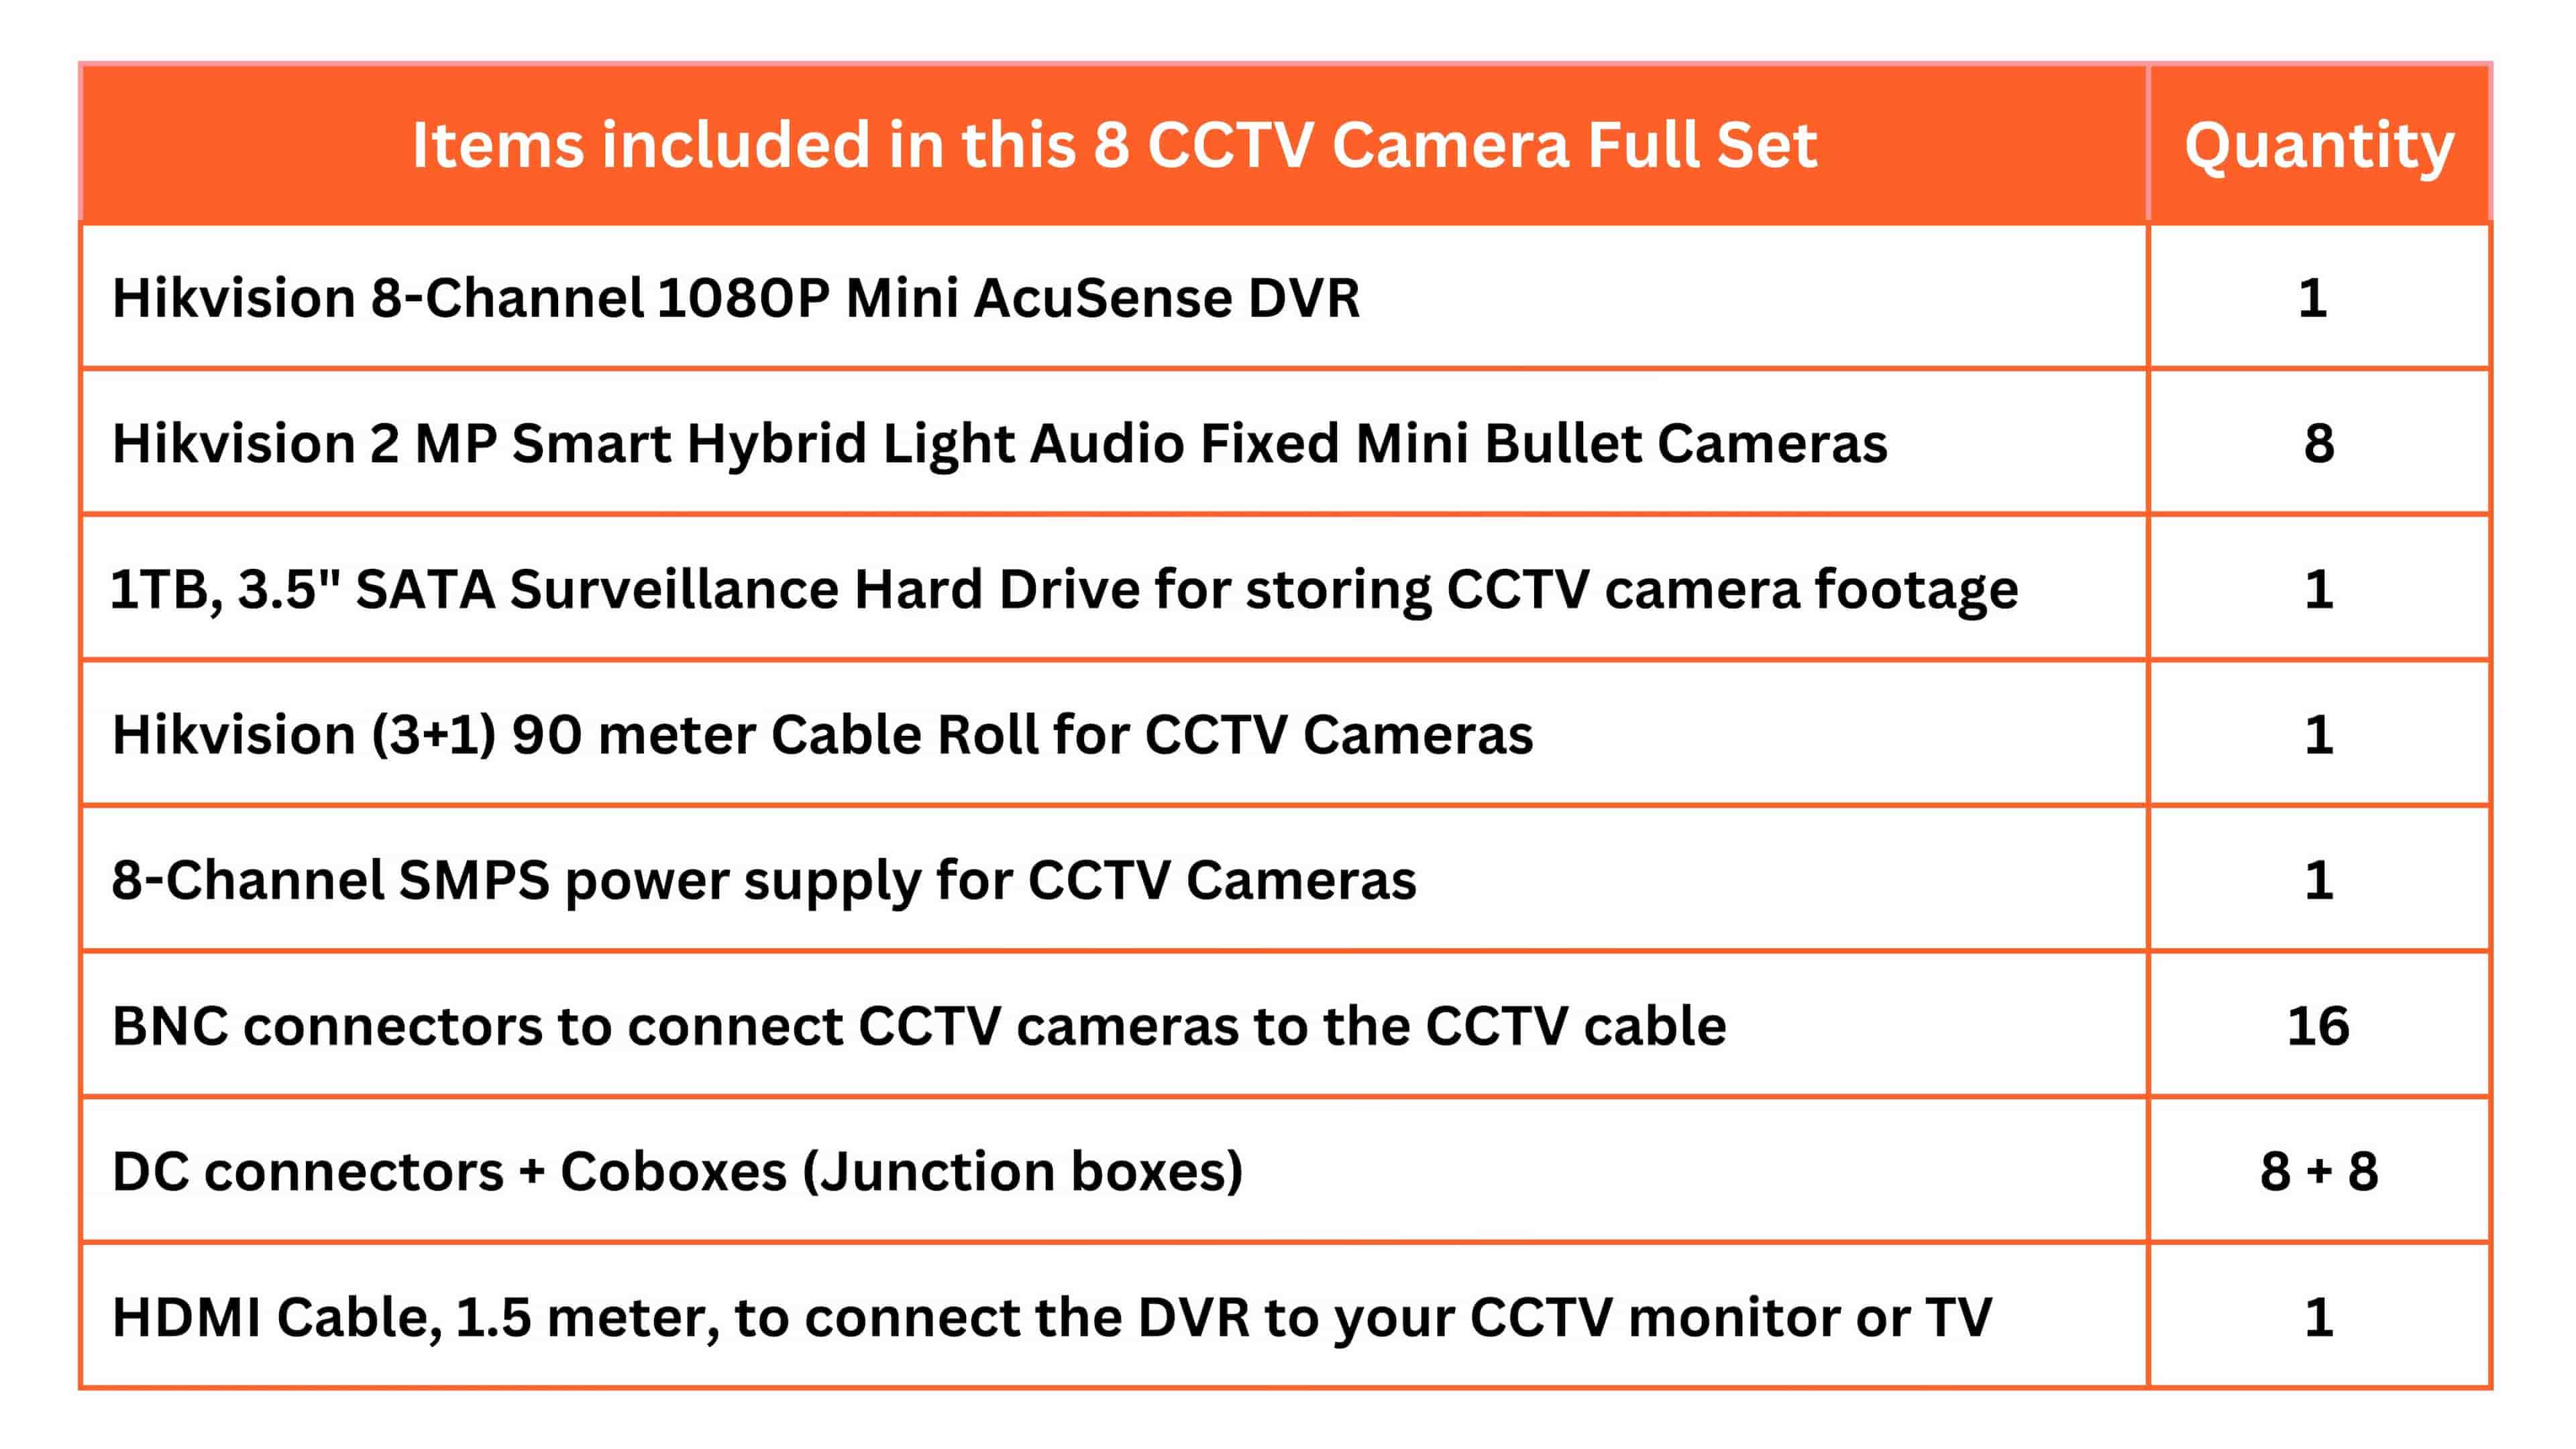 HIKVISION 8 CCTV Camera Full Set with 8 Channel 1080P DVR, 8x 2MP Smart Hybrid Cameras, 1TB HDD, Cable Roll, 8 CH Power Supply, BNC, DC, Cobox & HDMI